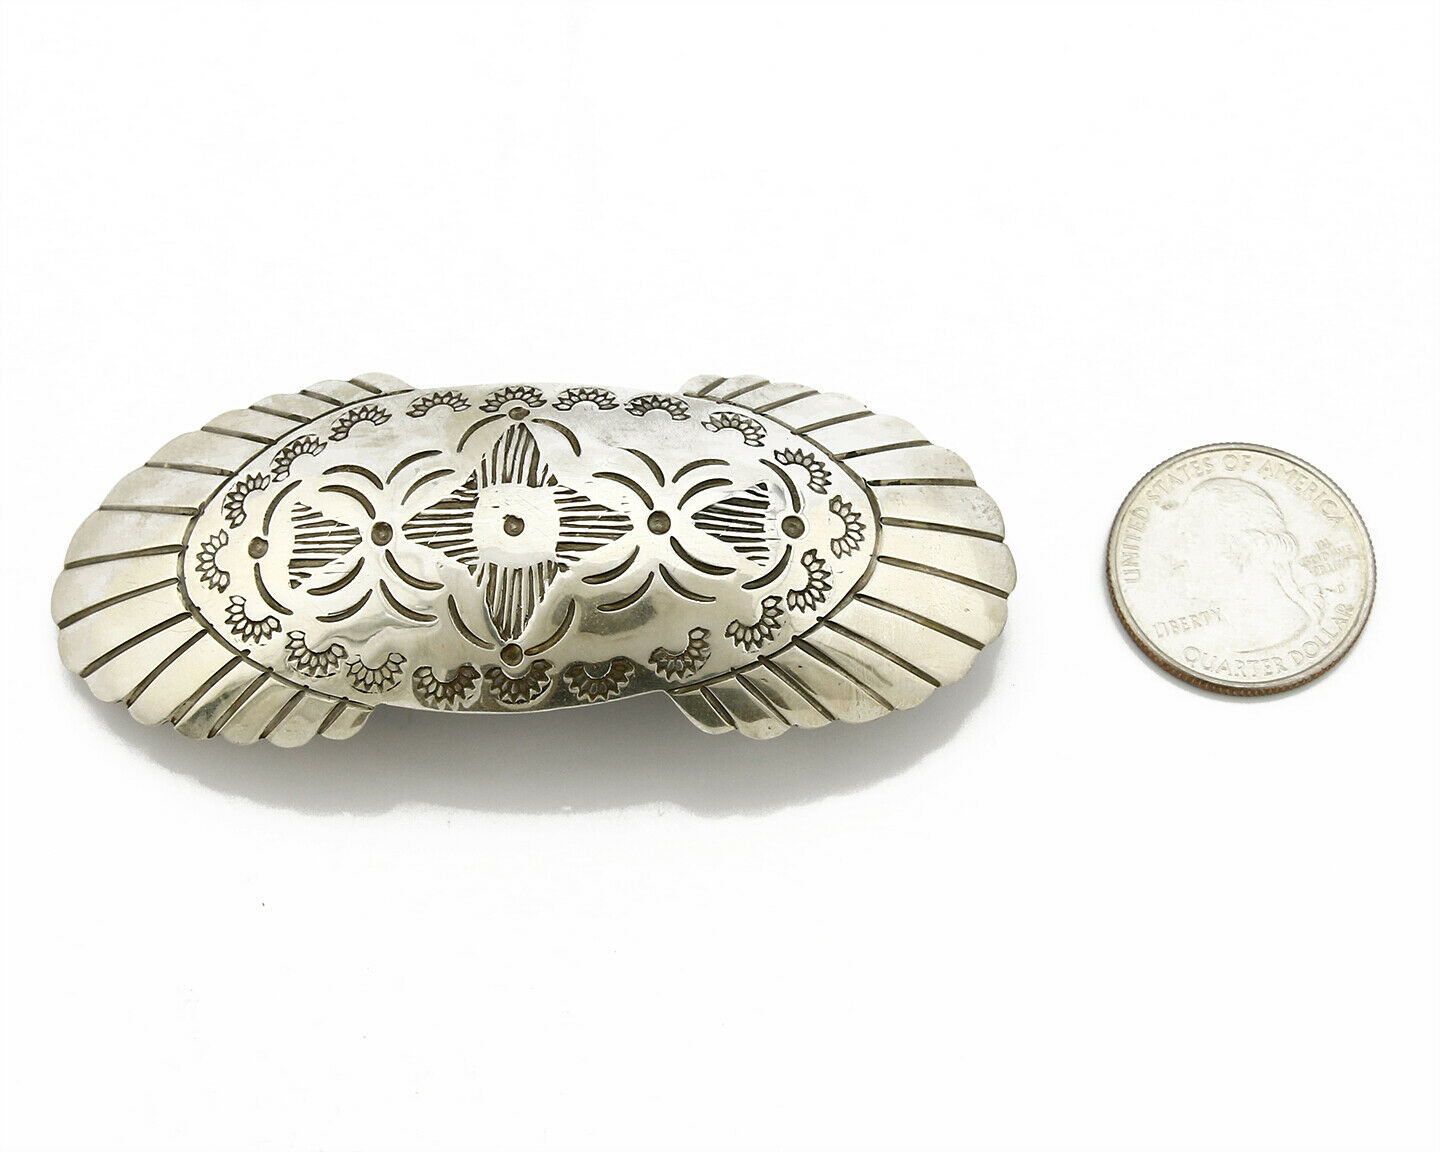 Navajo Signed Montoya 925 SOLID SILVER Hand Stamped 36mm Wide Barrette Hair Clip